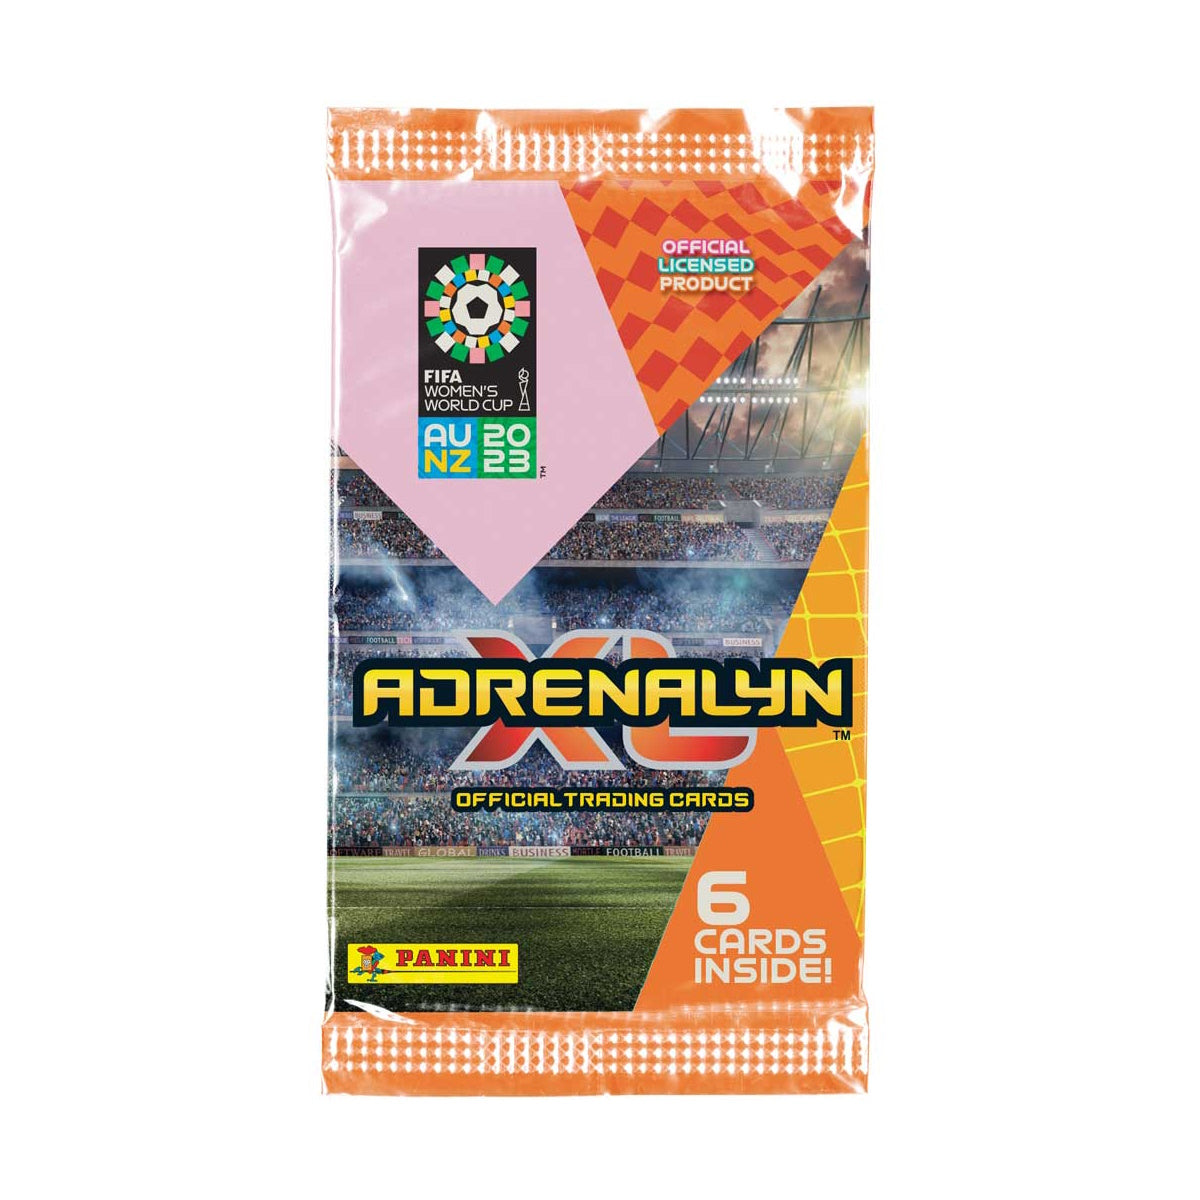 2023 Panini Adrenalyn XL Womens FIFA World Cup Cards Box online